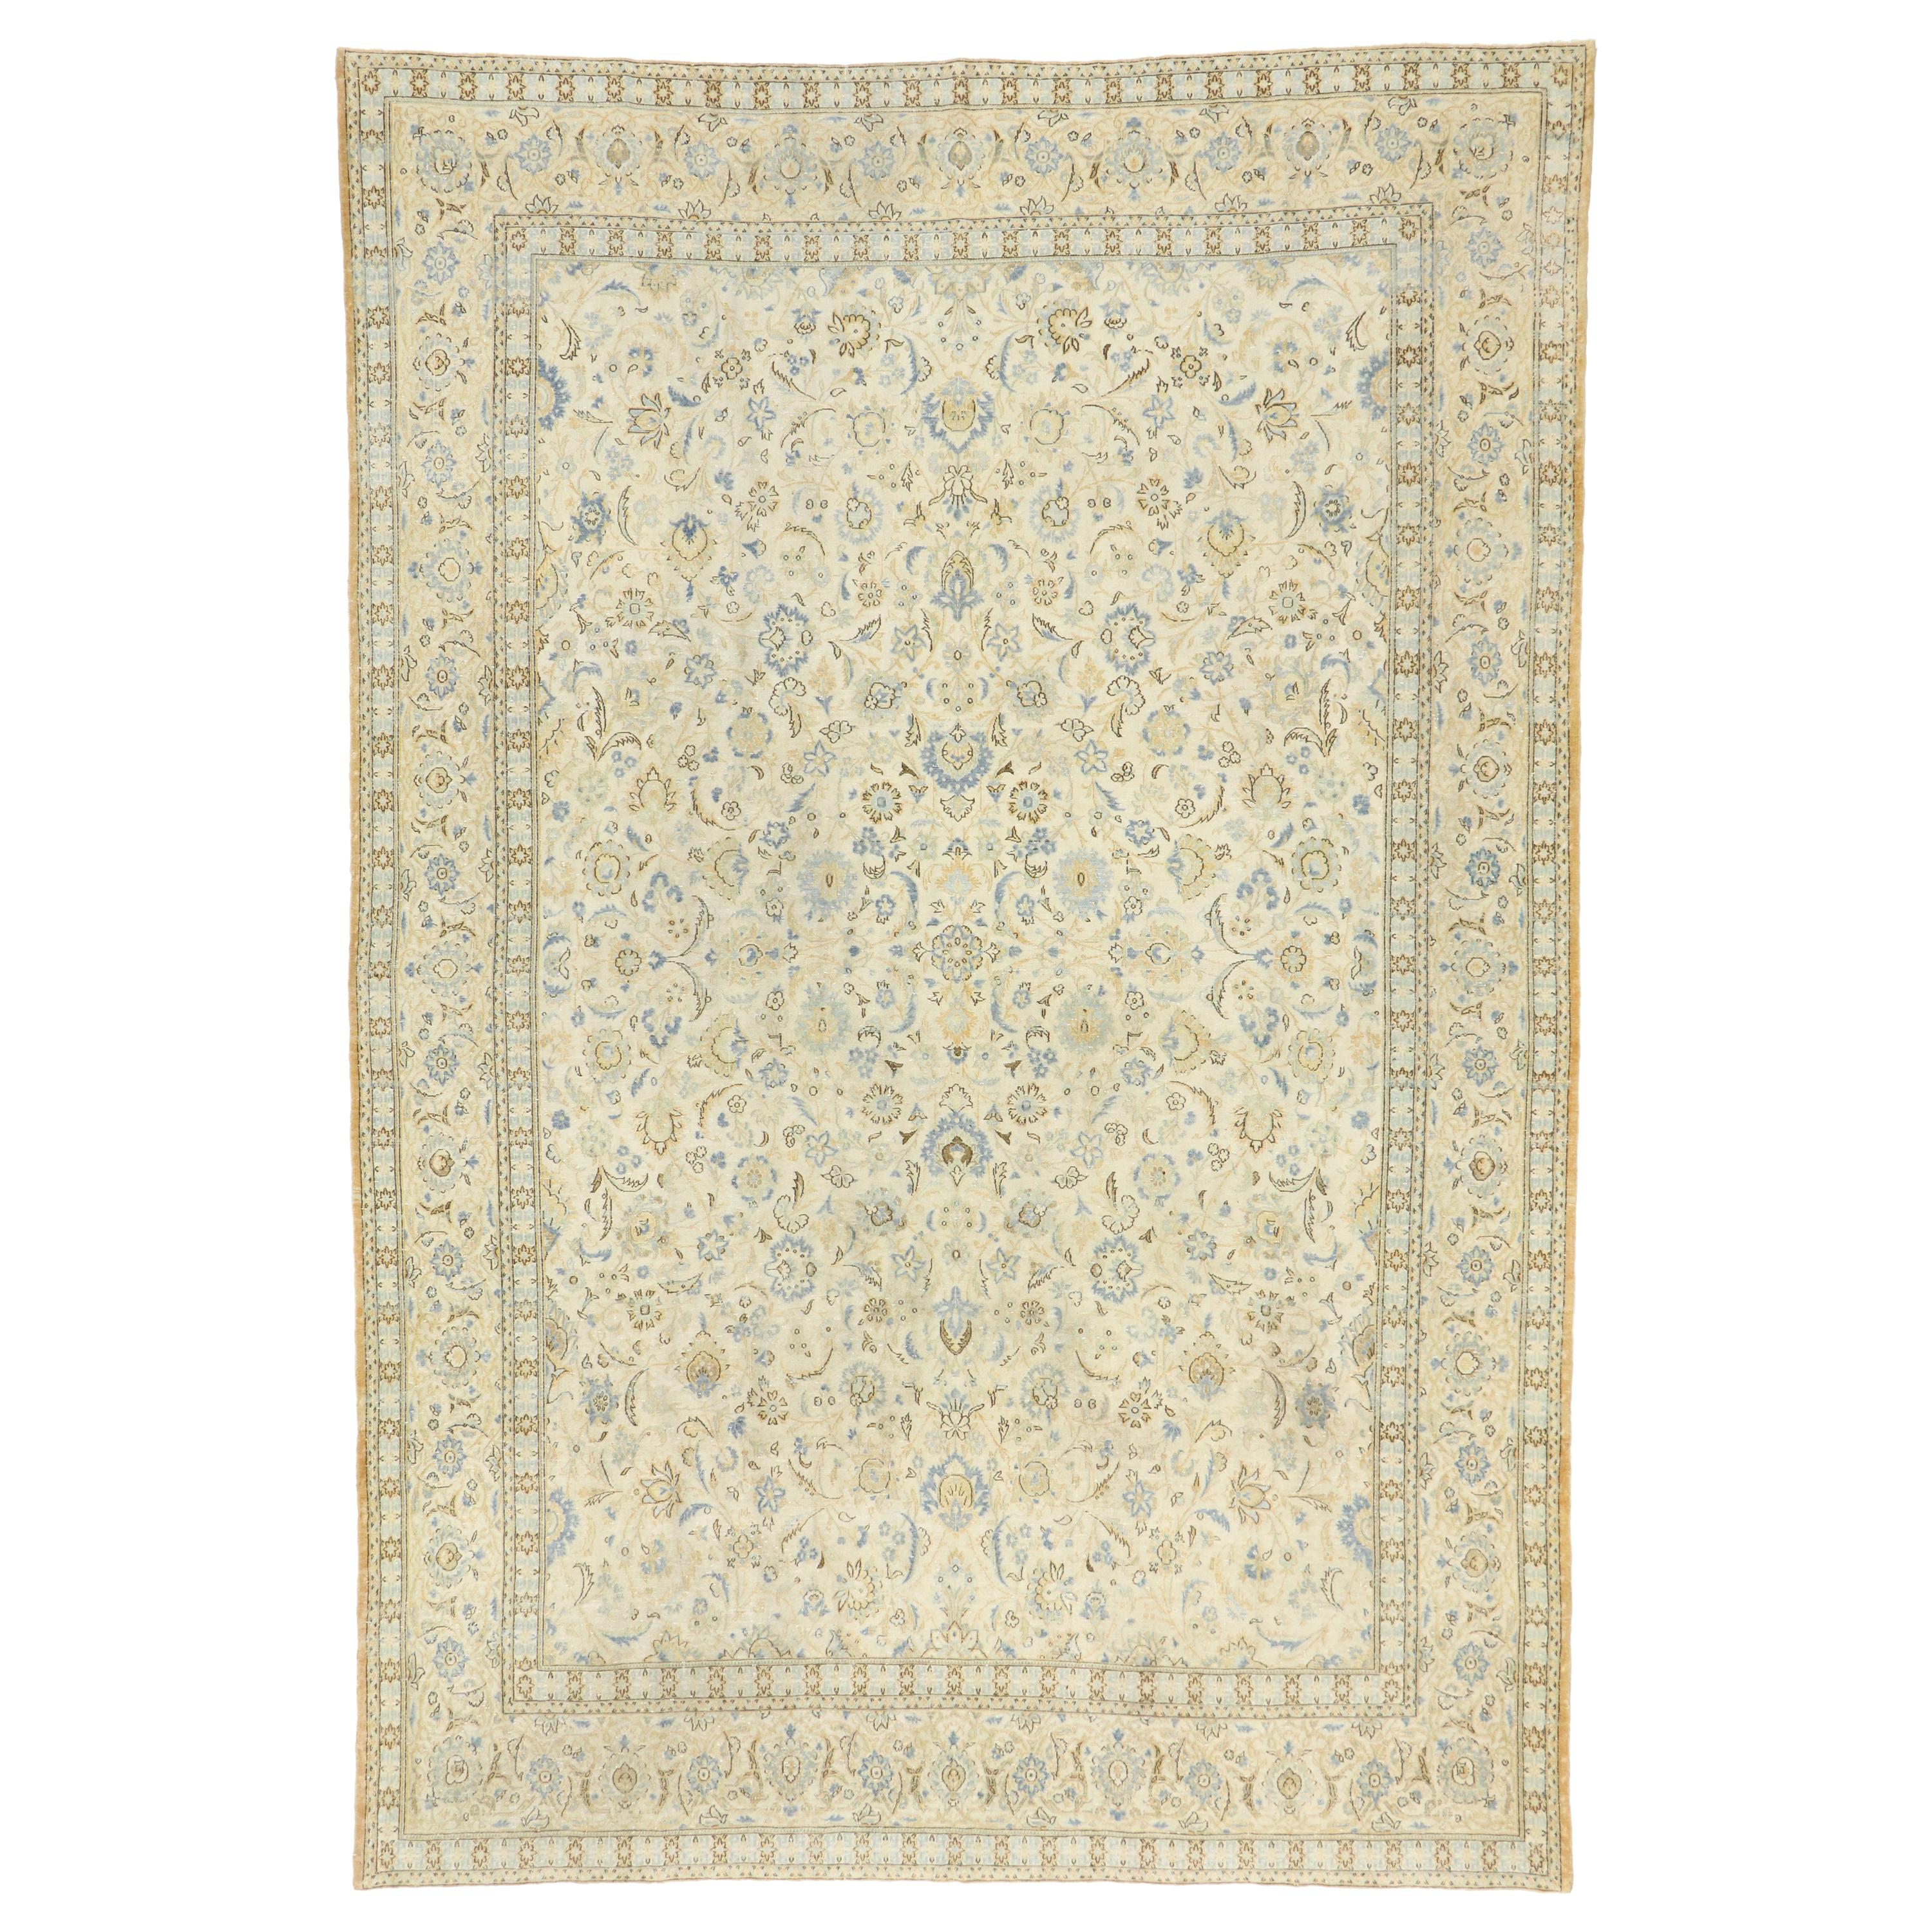 Distressed Antique Persian Kashan Rug with Cotswold English Manor Style